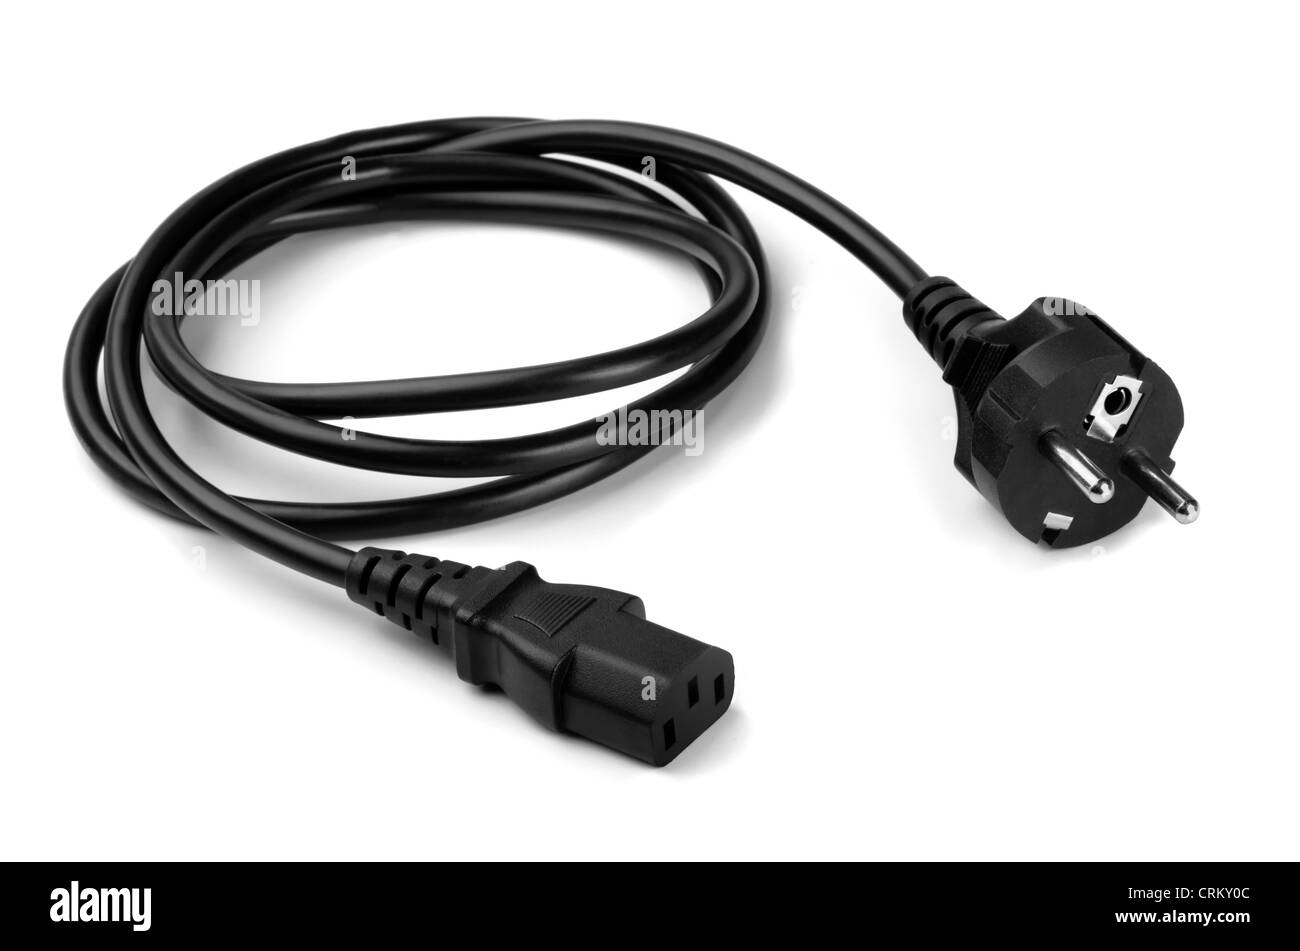 Black power cable with plug and socket isolated on white Stock Photo